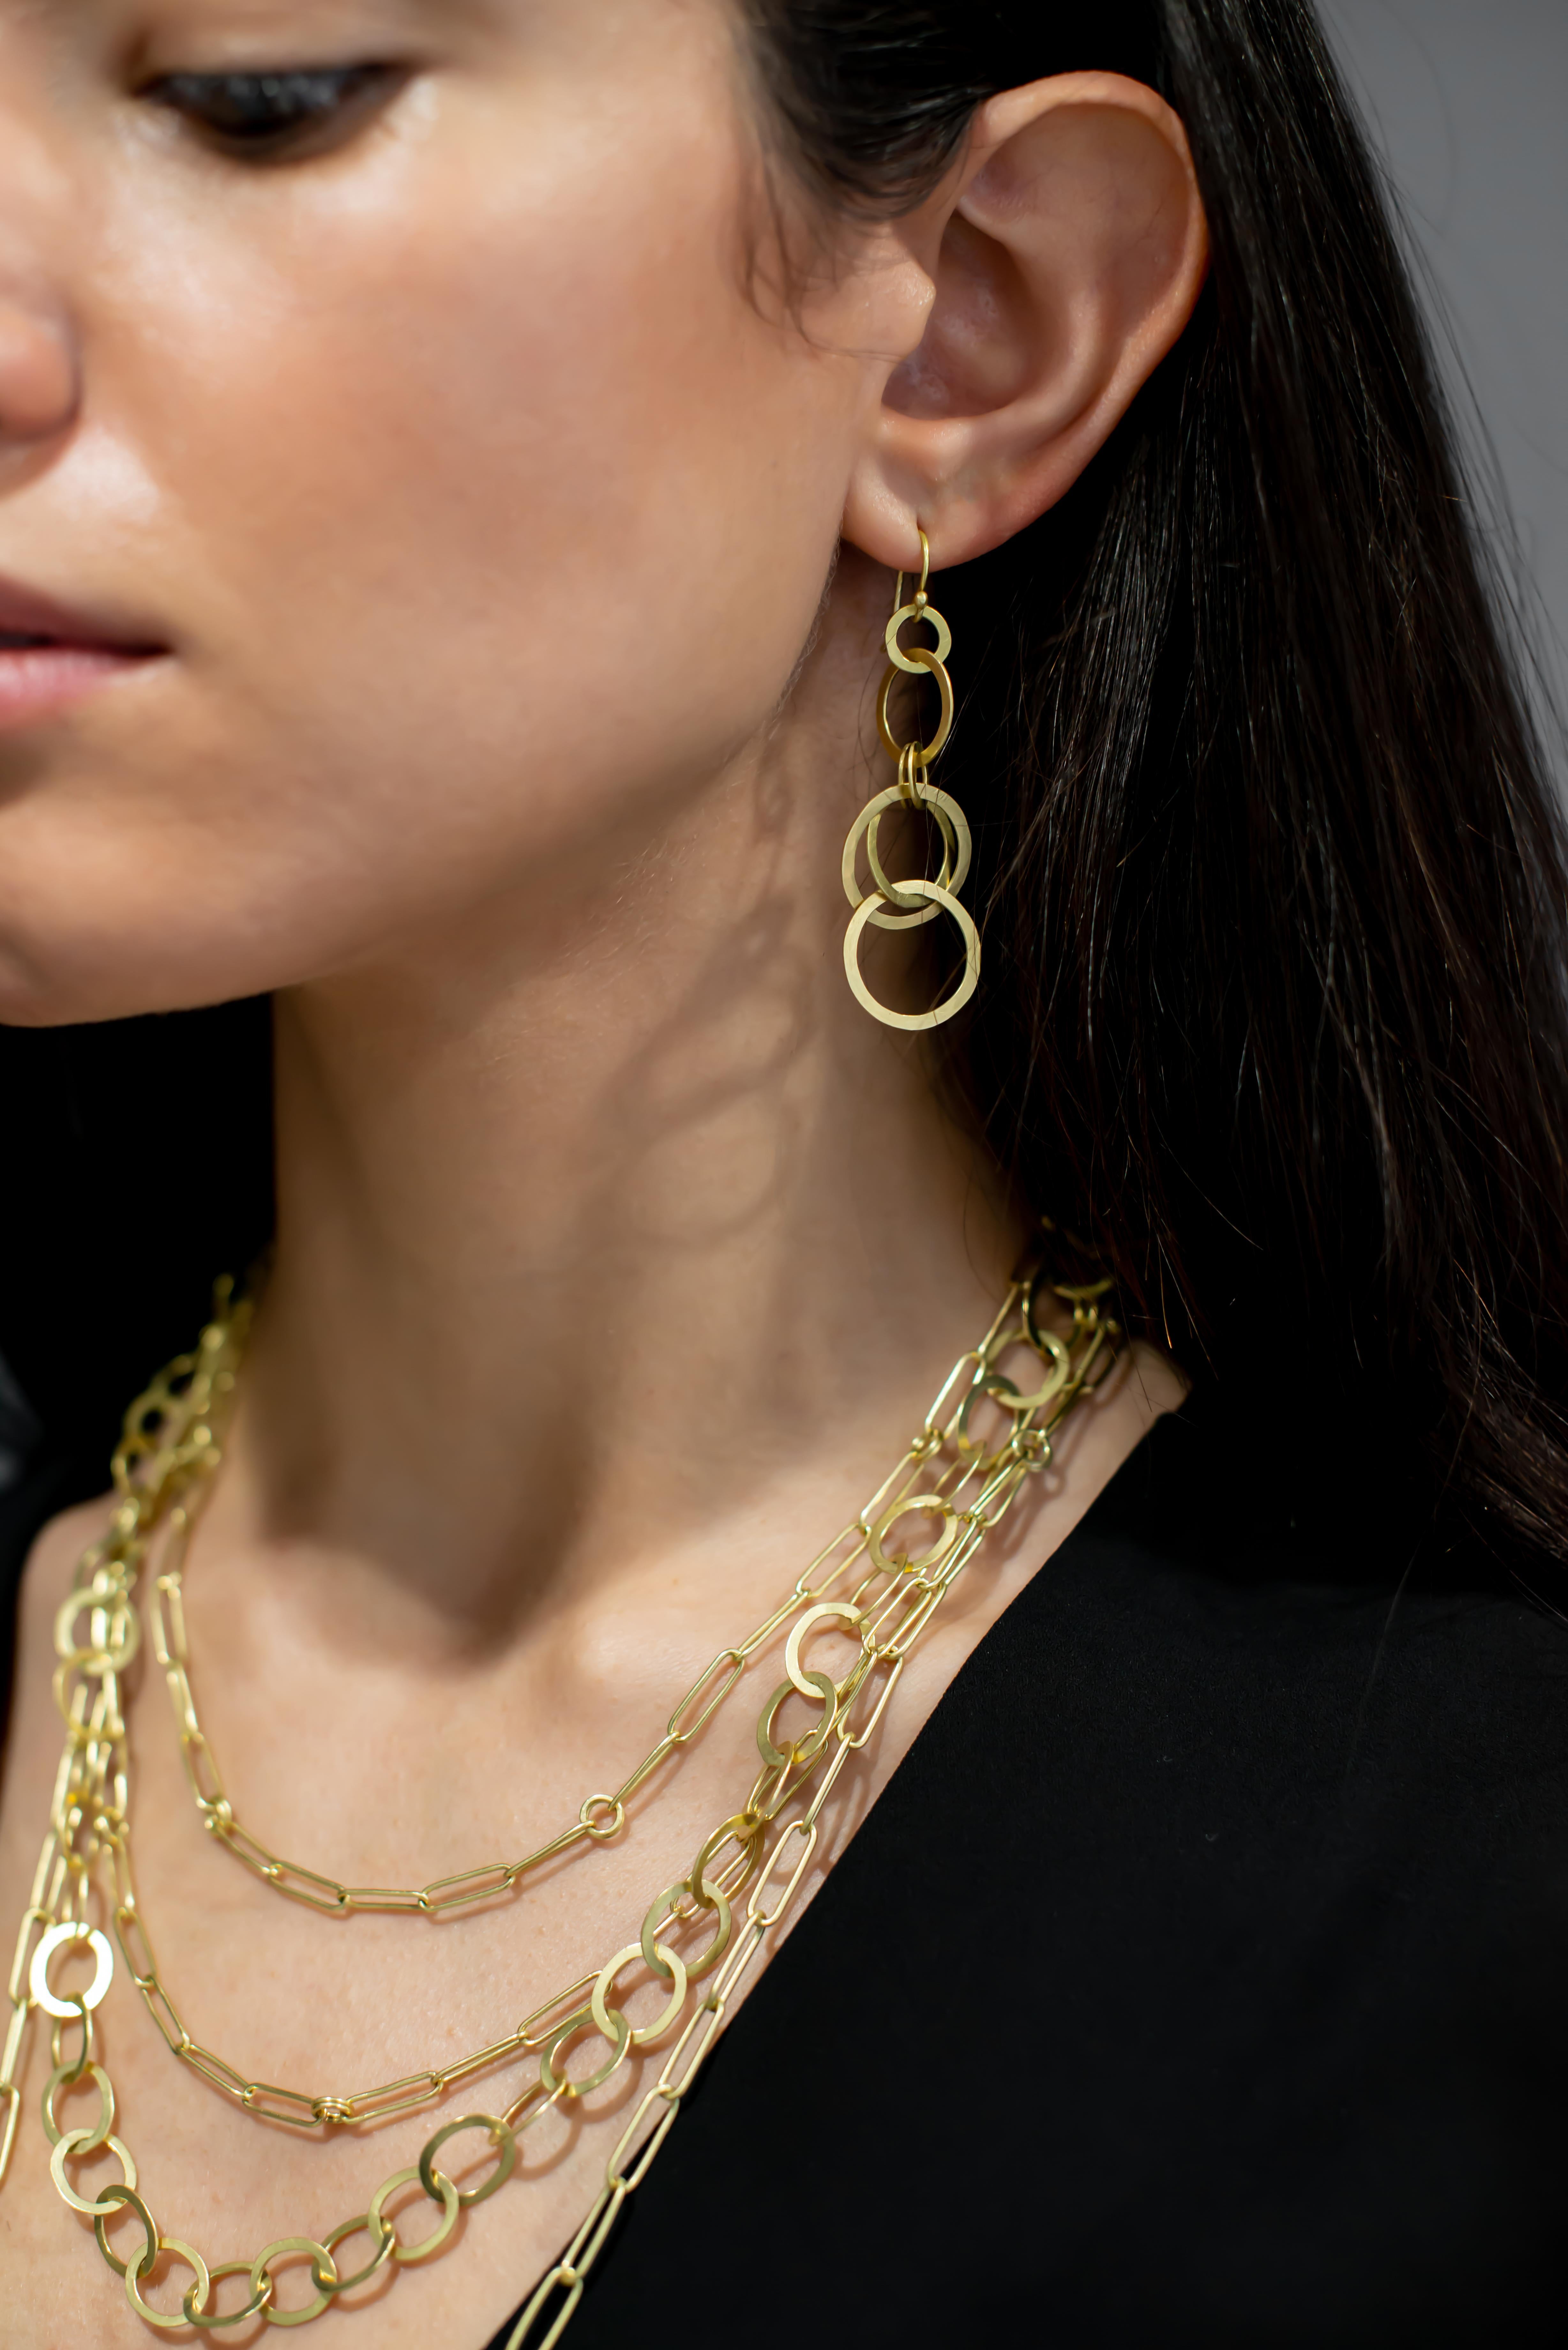 Faye Kim 18K Gold Multi small planished loop earrings

These handcrafted cascading planished loop earrings are your go-to choice for everyday.  Fun and easy to wear from running errands to out to dinner with your favorite people.  
1.25